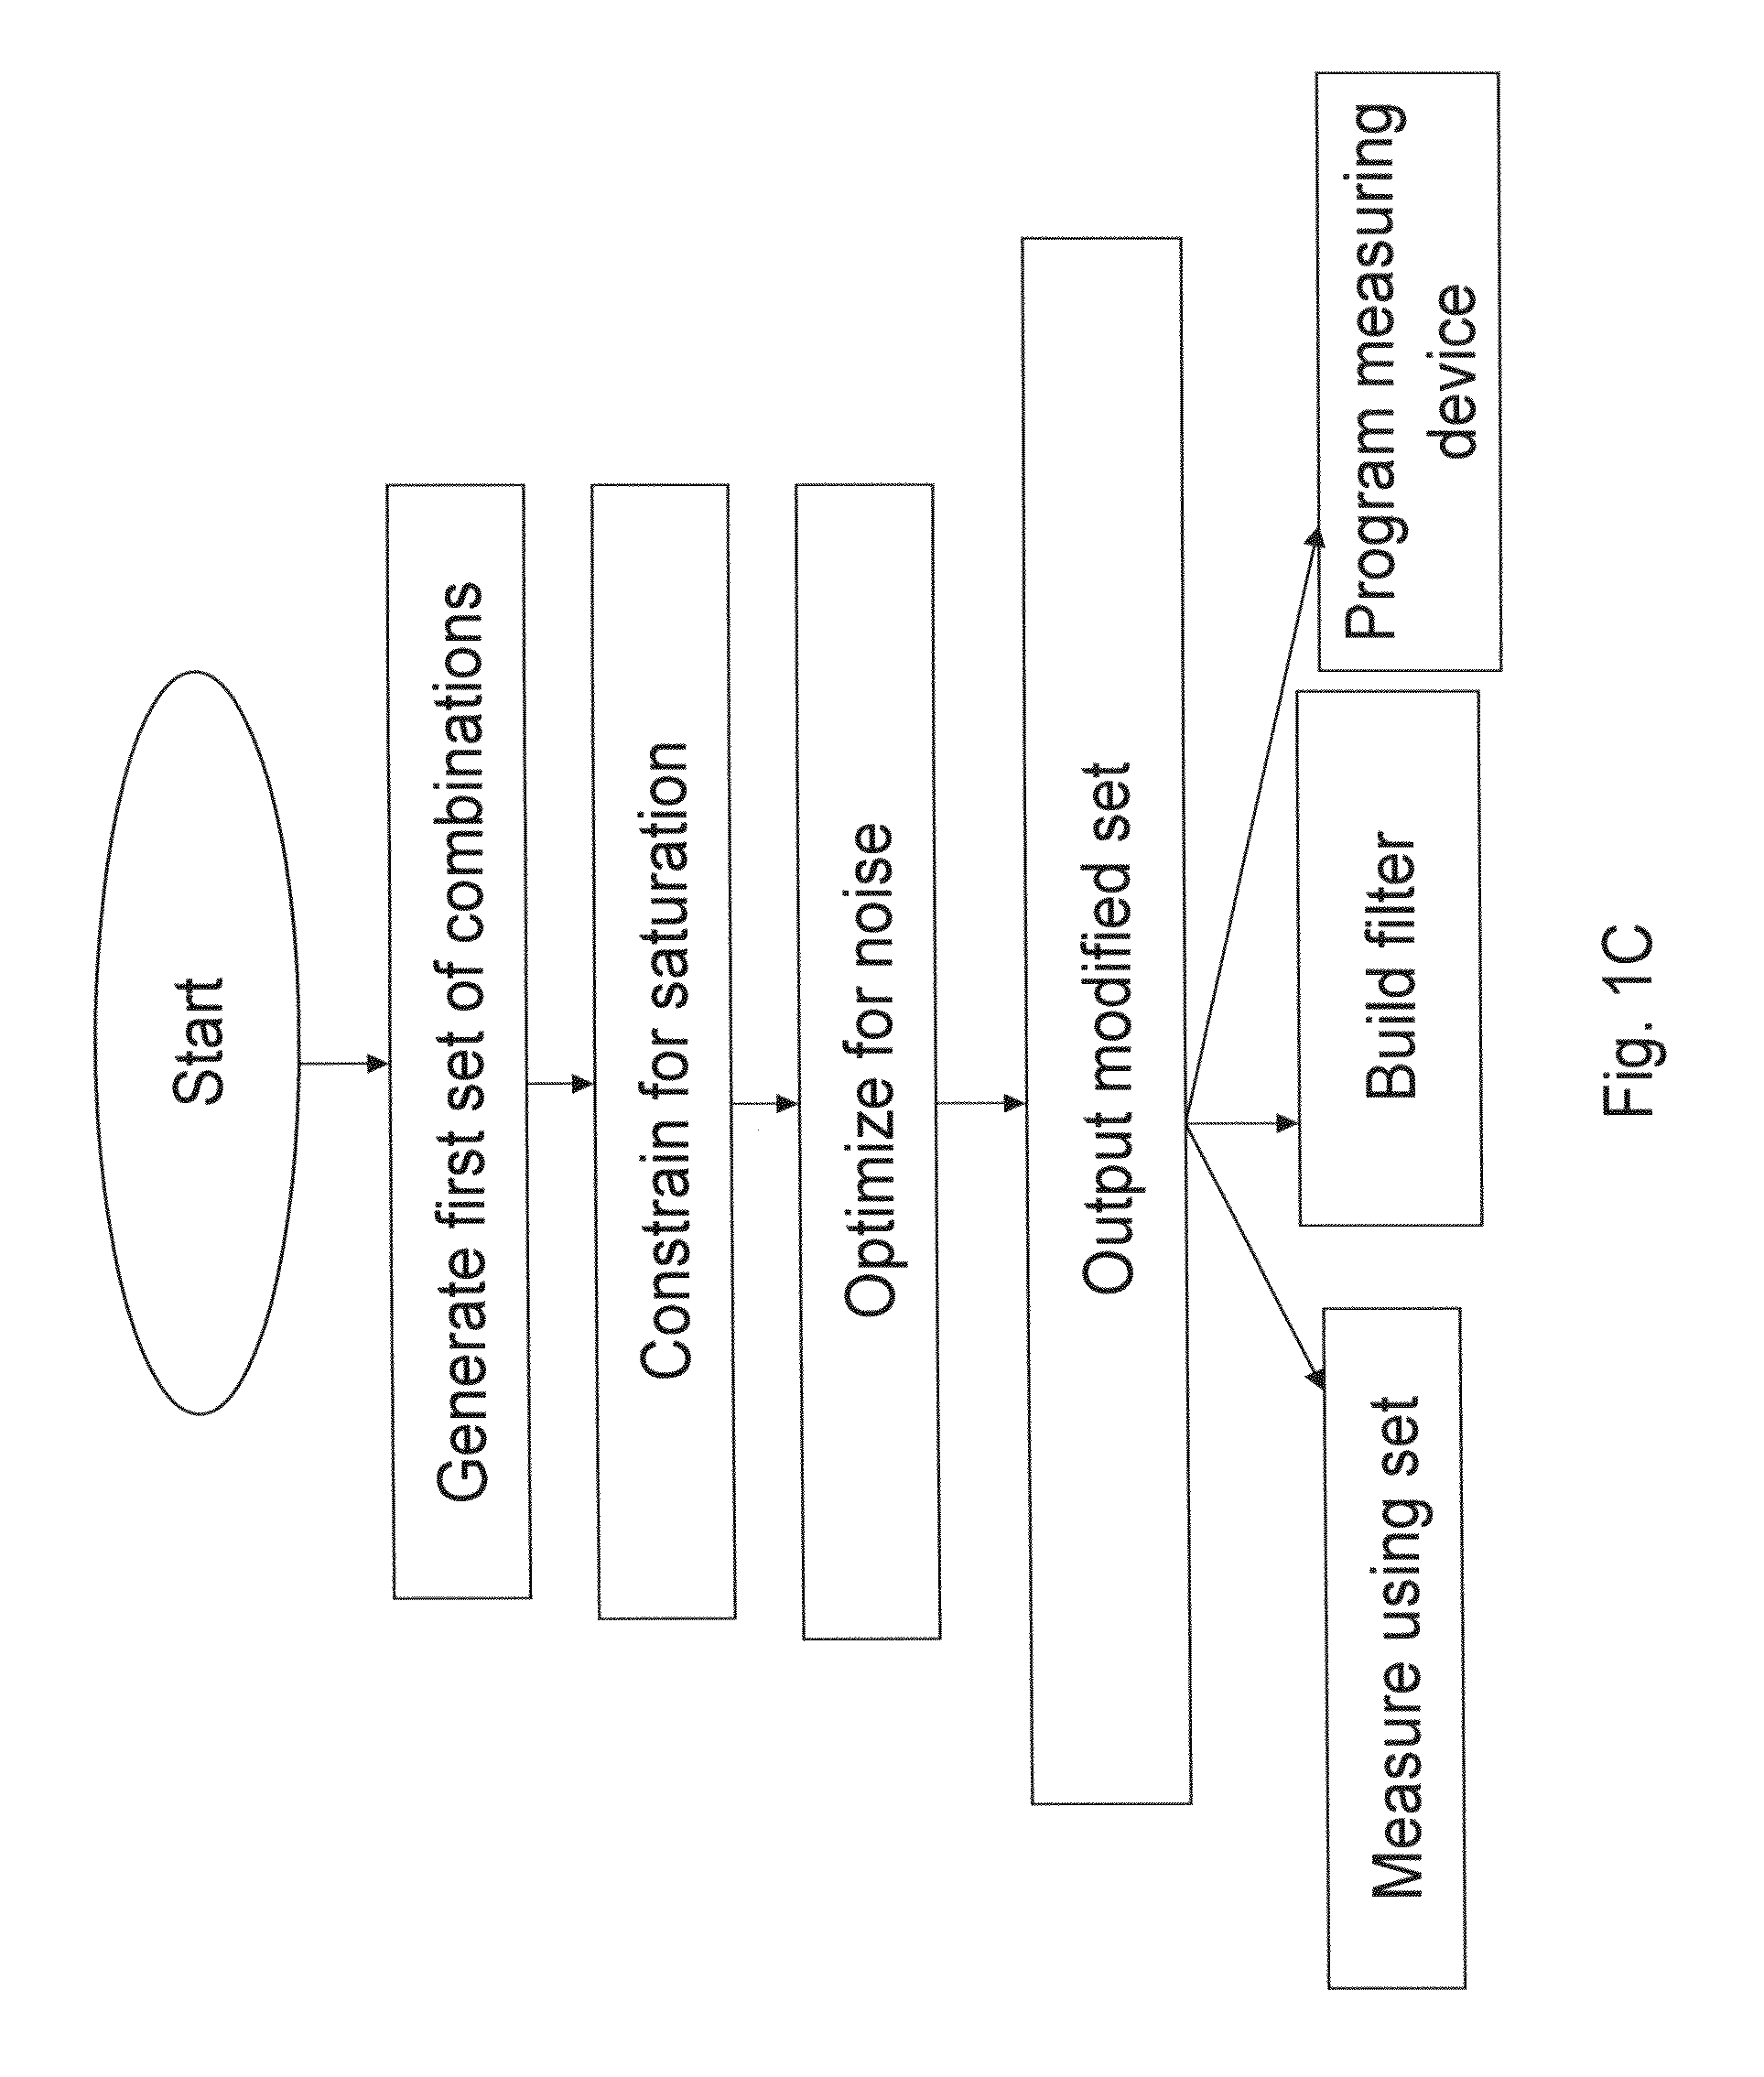 System and method for multiplexed measurements